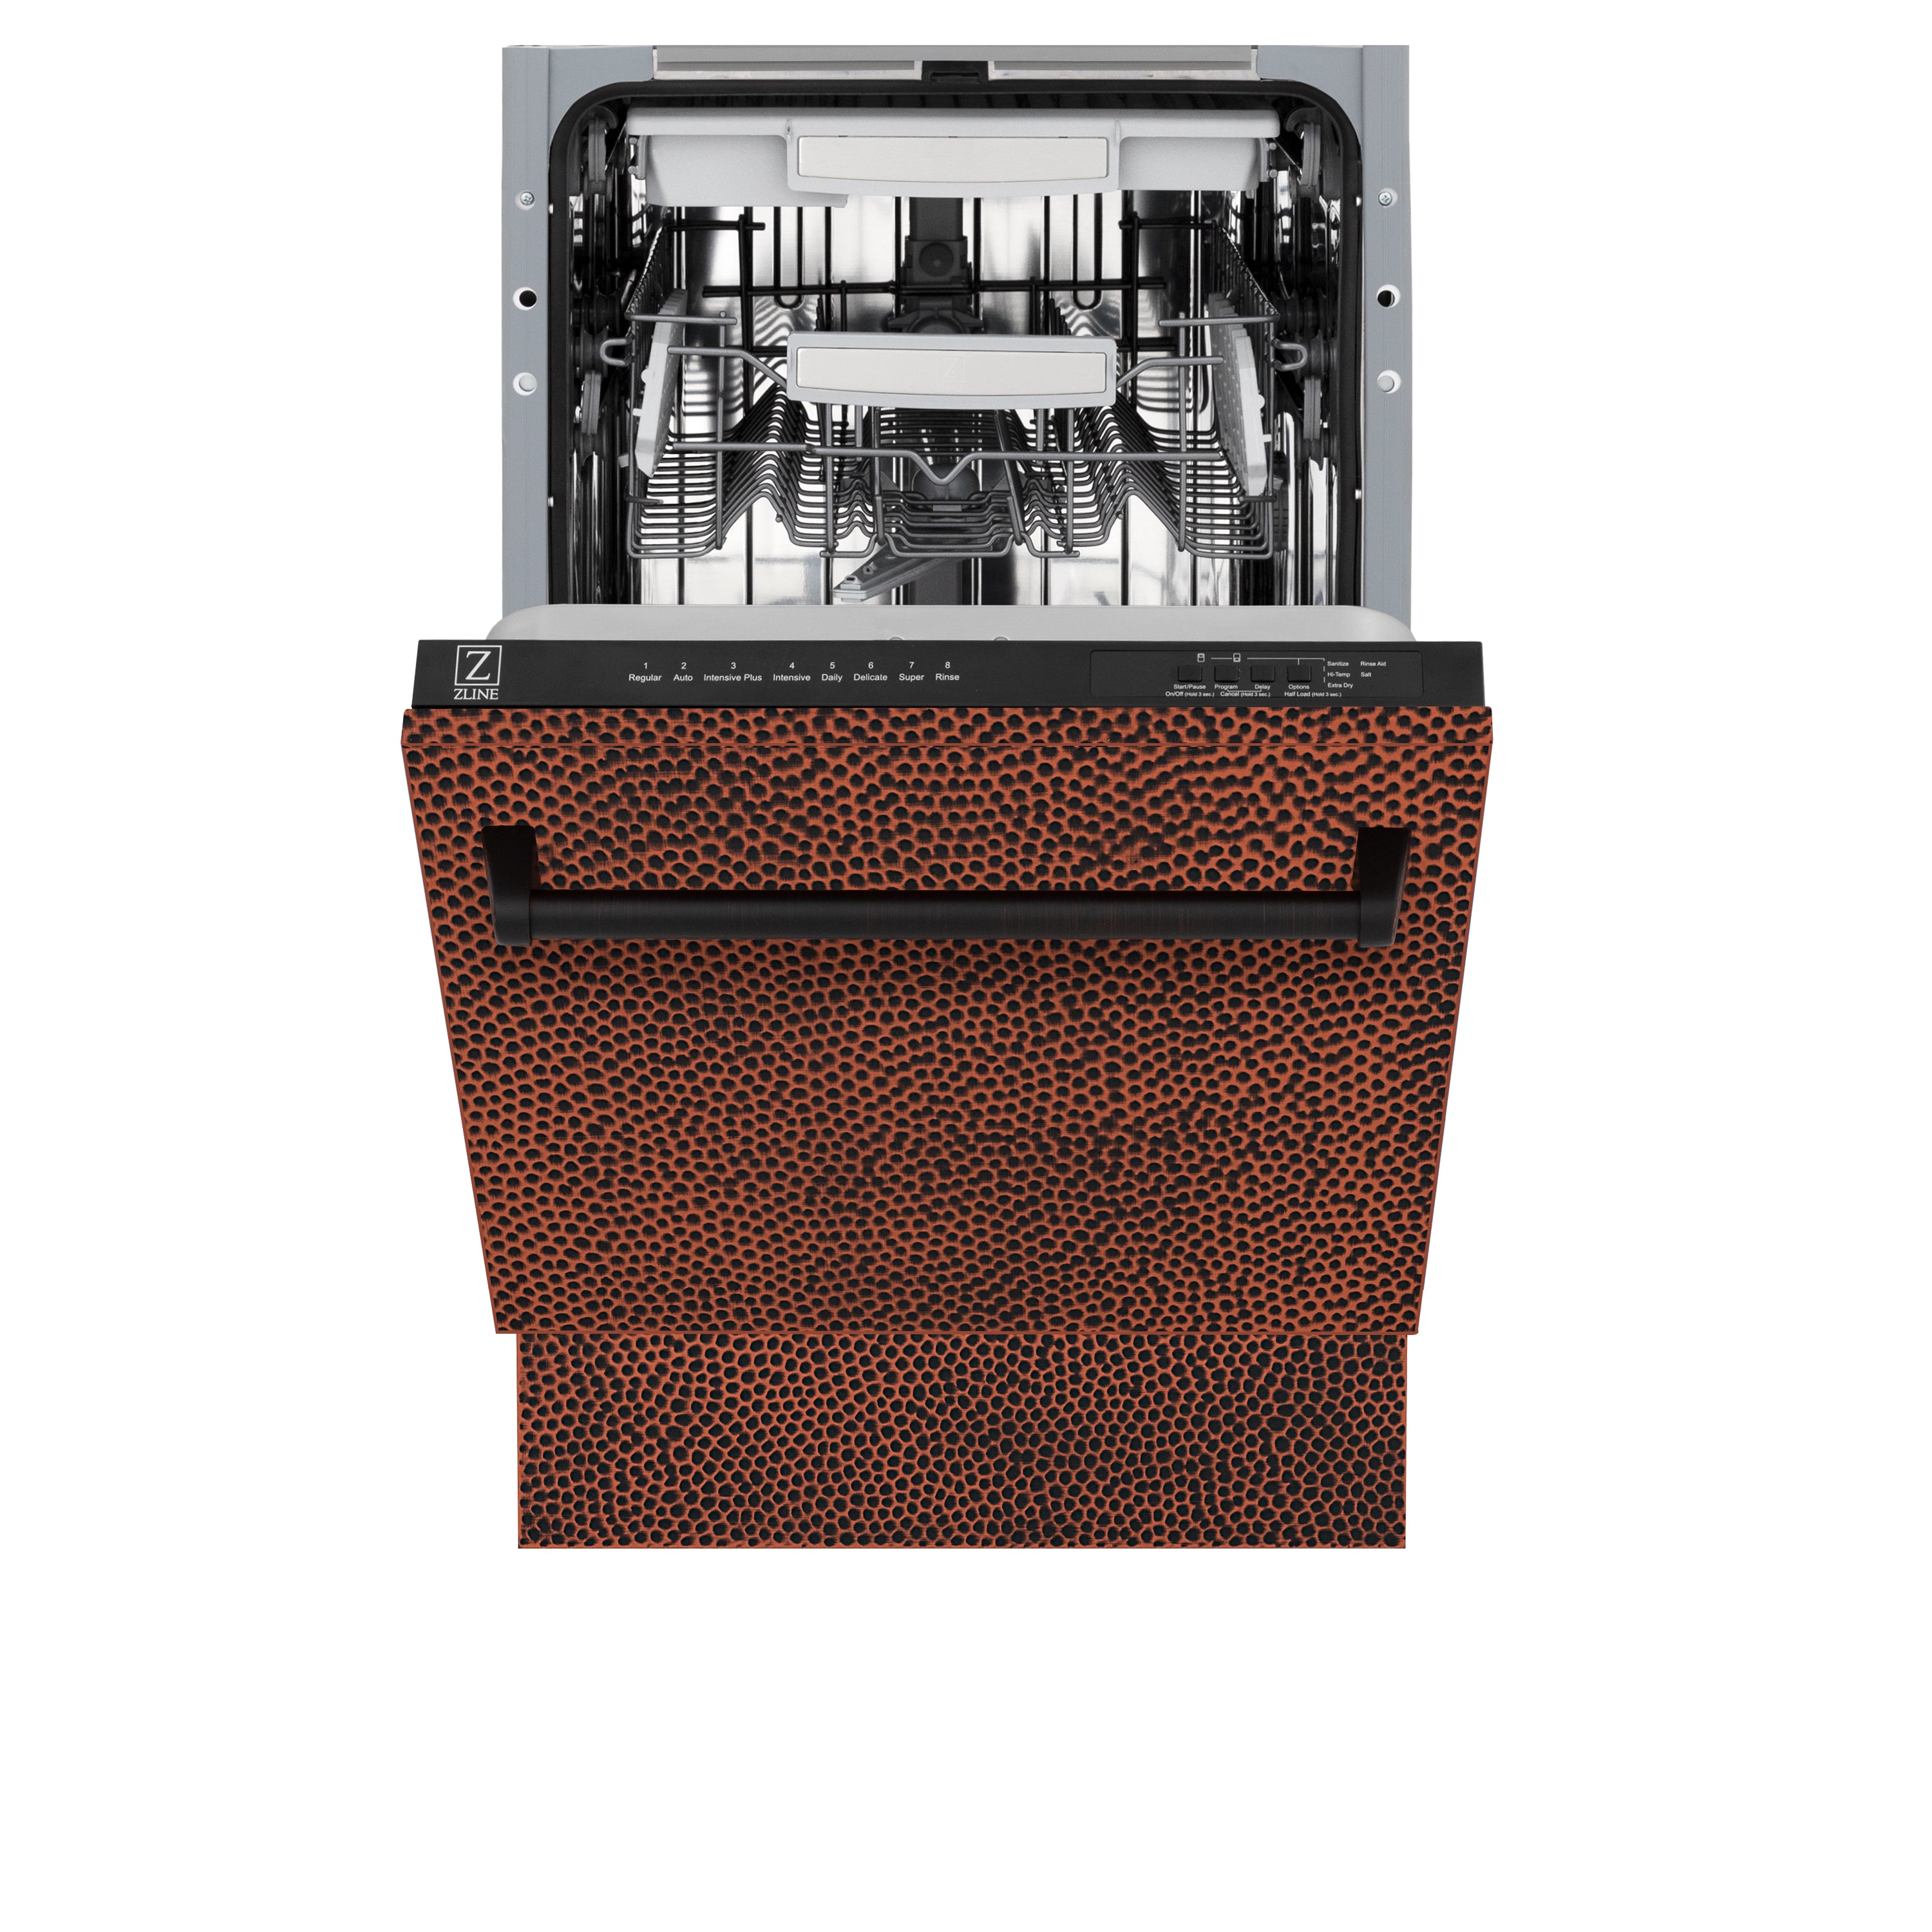 ZLINE 18" Tallac Series 3rd Rack Top Control Built-In Dishwasher in Hand Hammered Copper with Stainless Steel Tub, 51dBa (DWV-HH-18)